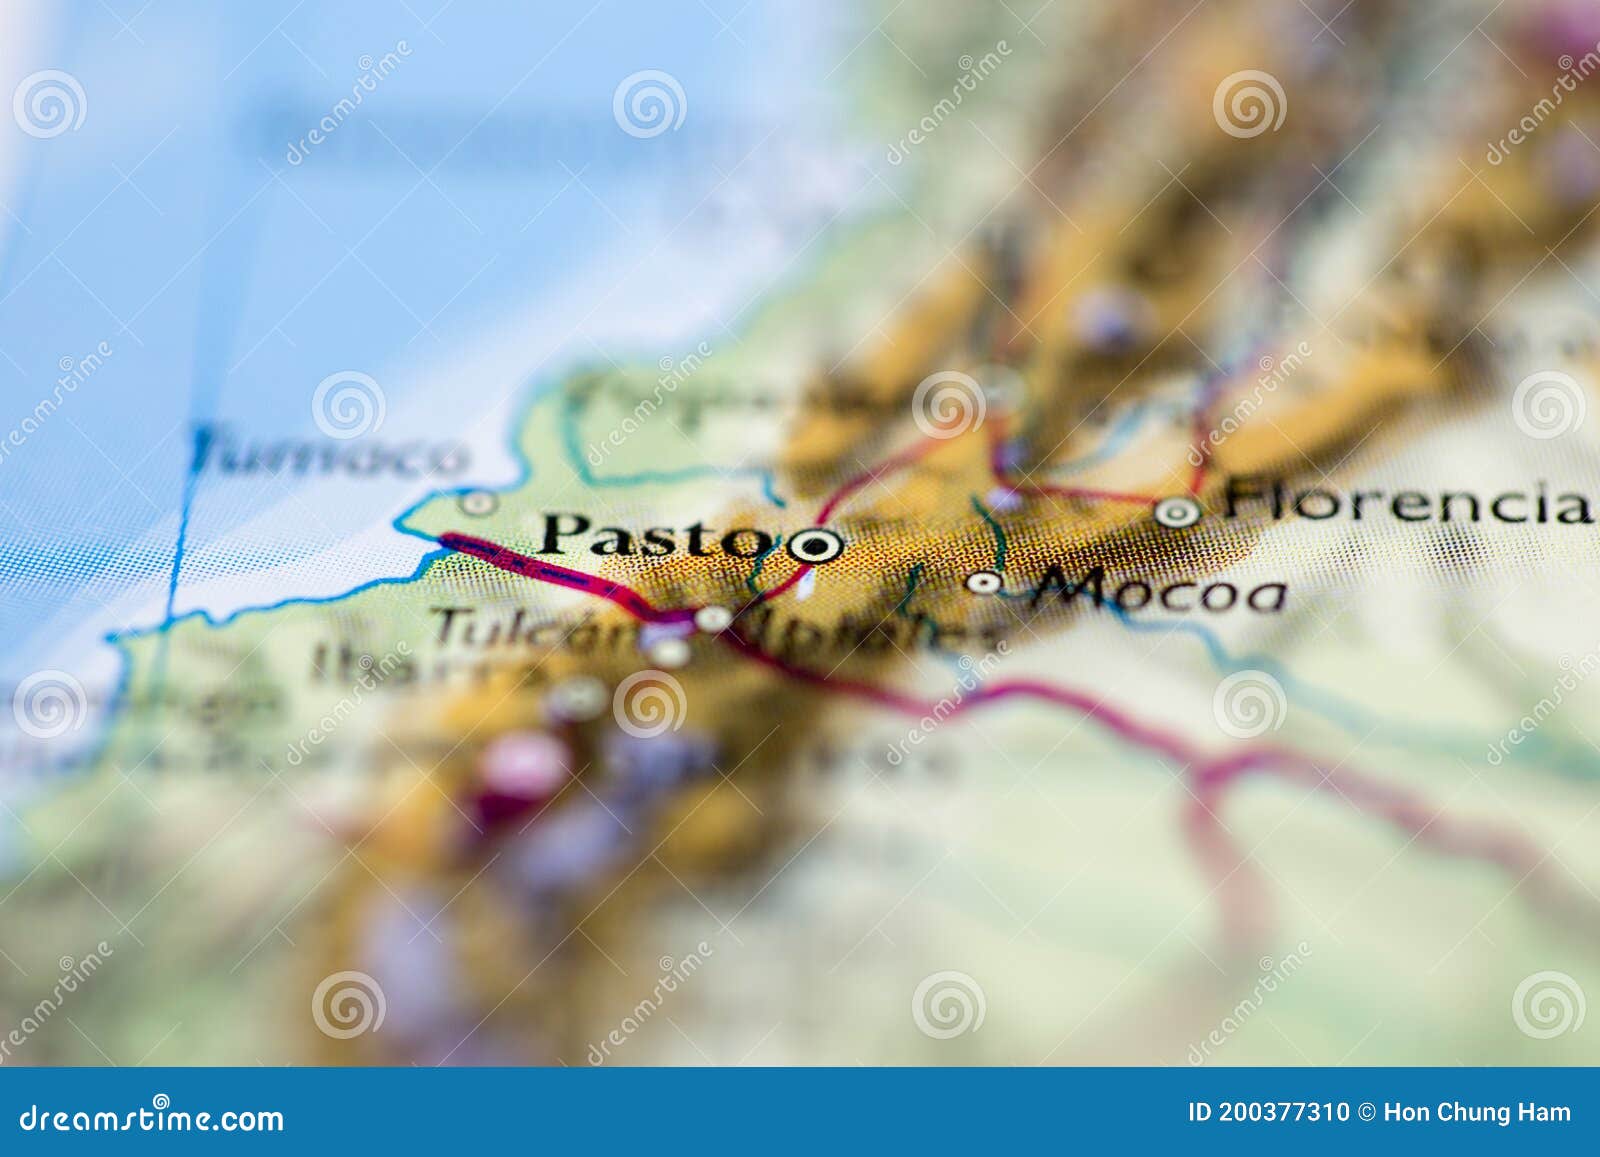 shallow depth of field focus on geographical map location of pasto city colombia south america continent on atlas